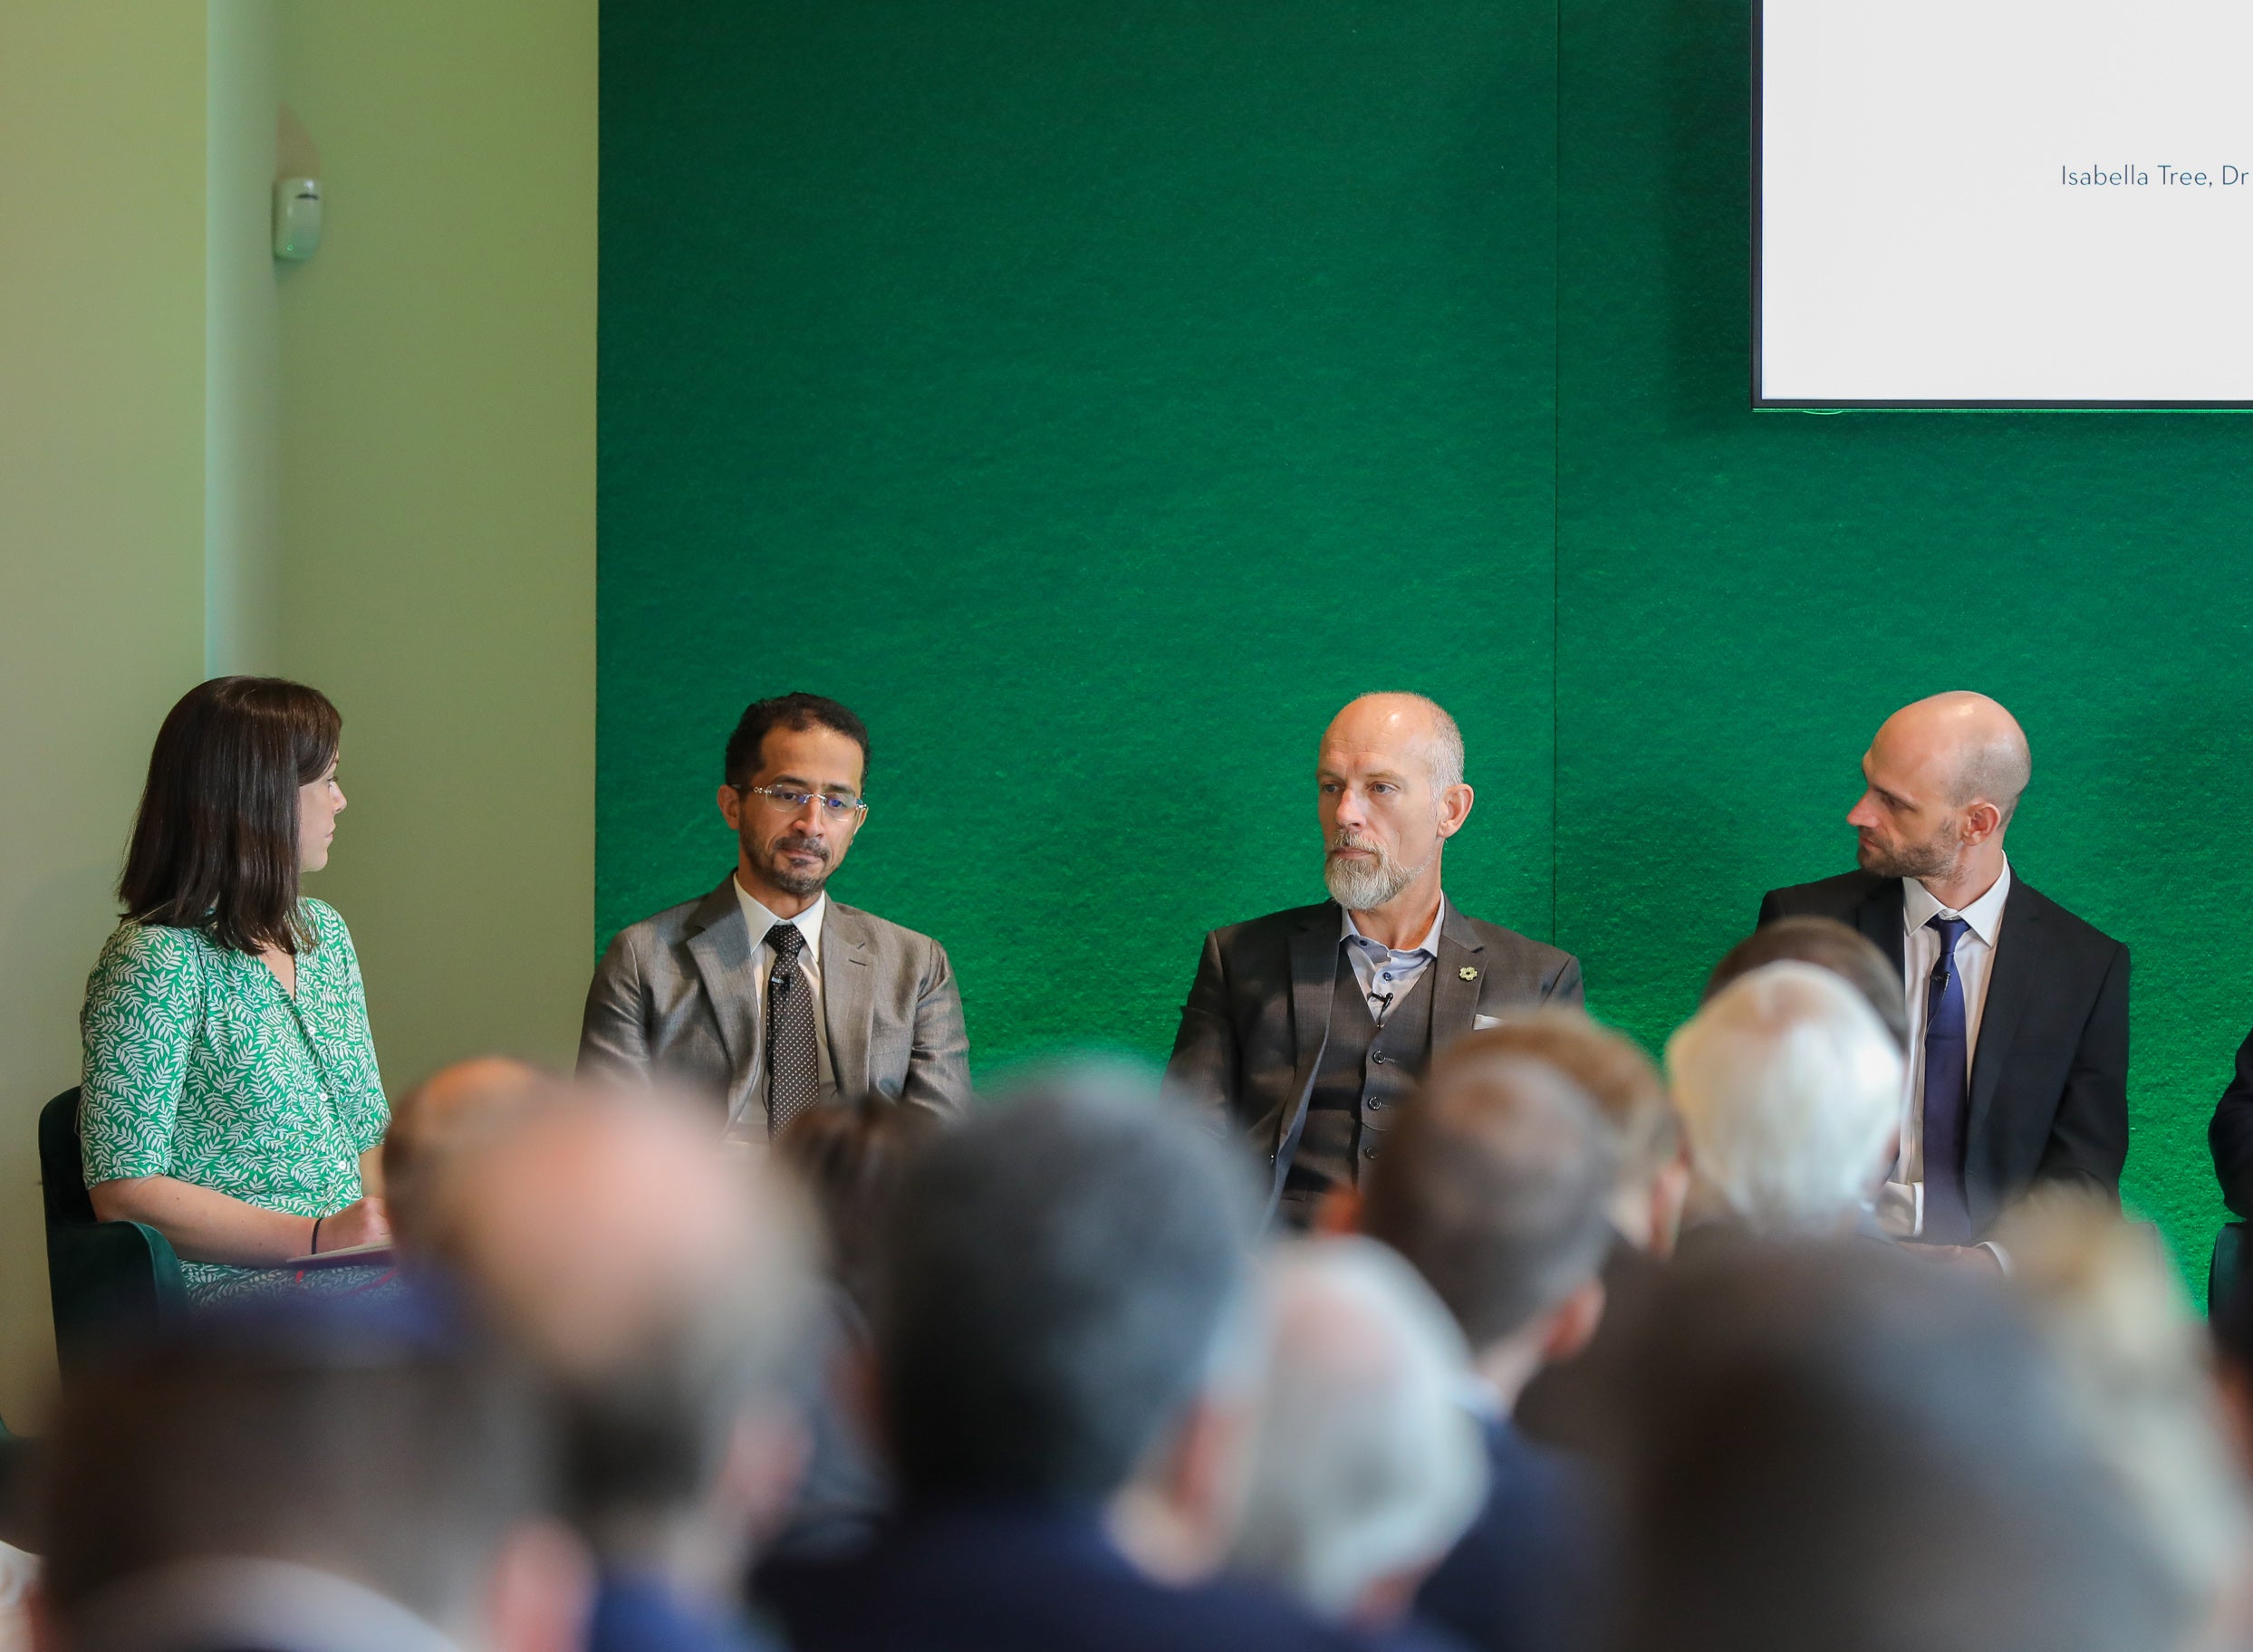 Waleed Al Dayel (centre left), Dr Paul Marshall (centre right), and Dr Andrew Tilker (right) discuss conservation and the importance of nature on a panel moderated by Isabel Hardman (left) on rewilding at the Saudi Green Initiative London summit at Waddesdon Manor